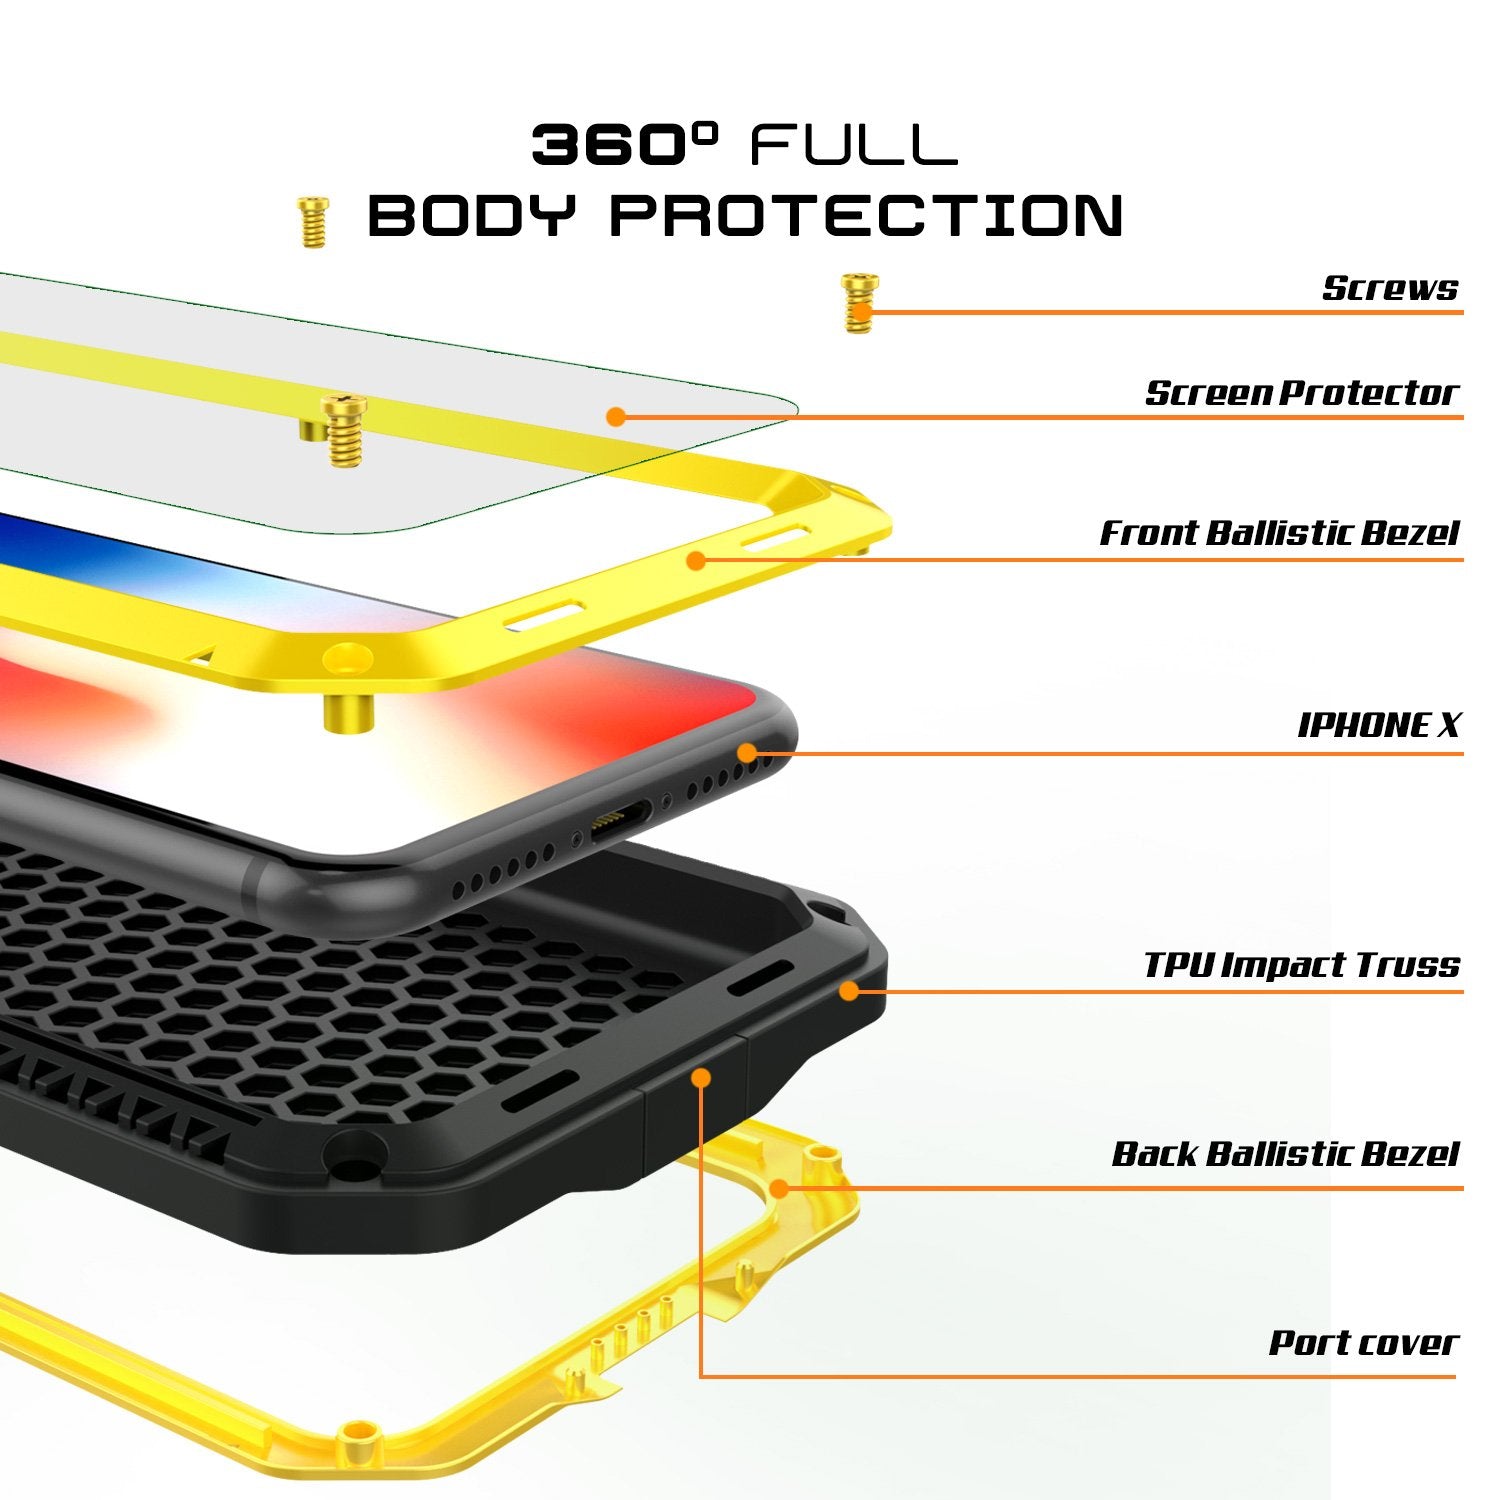 iPhone X Metal Case, Heavy Duty Military Grade Rugged Armor Cover [shock proof] Hybrid Full Body Hard Aluminum & TPU Design [non slip] W/ Prime Drop Protection for Apple iPhone 10 [Neon]